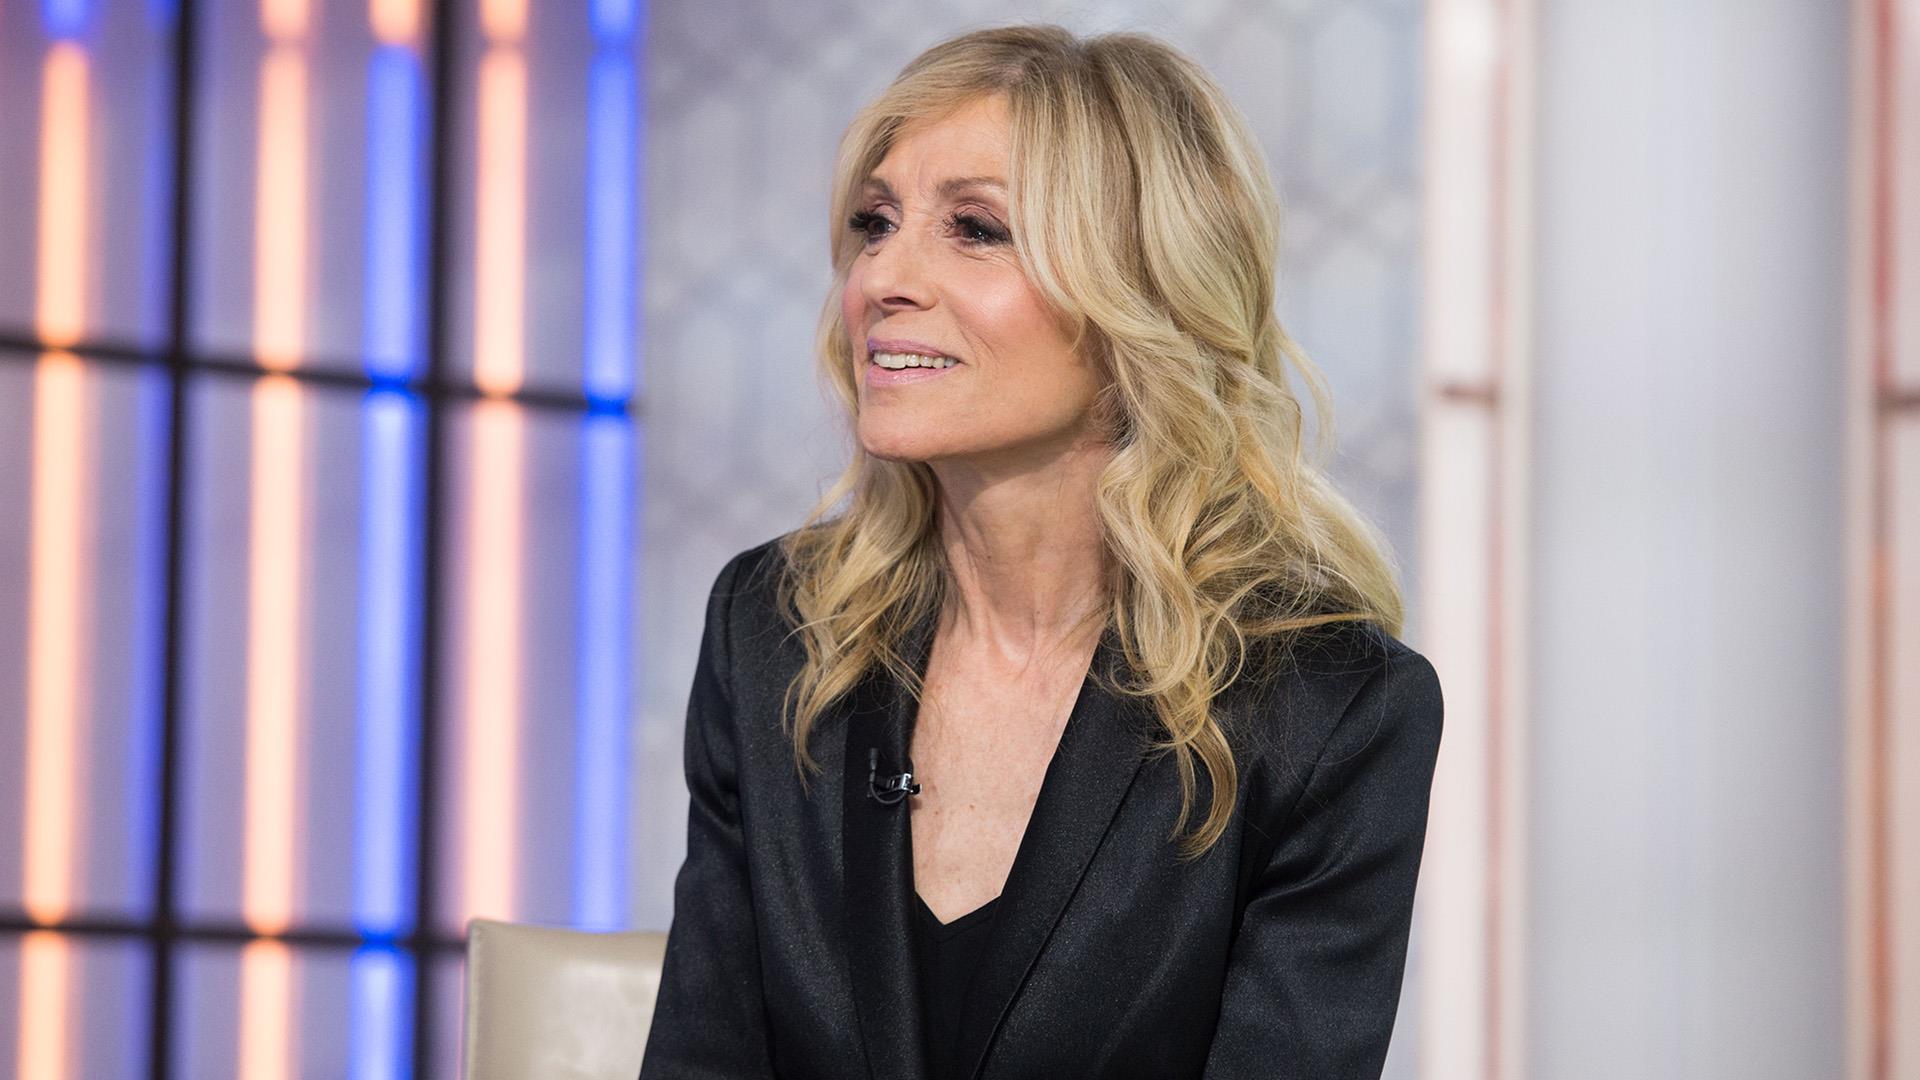 Judith Light talks about 'Transparent' and her latest award.